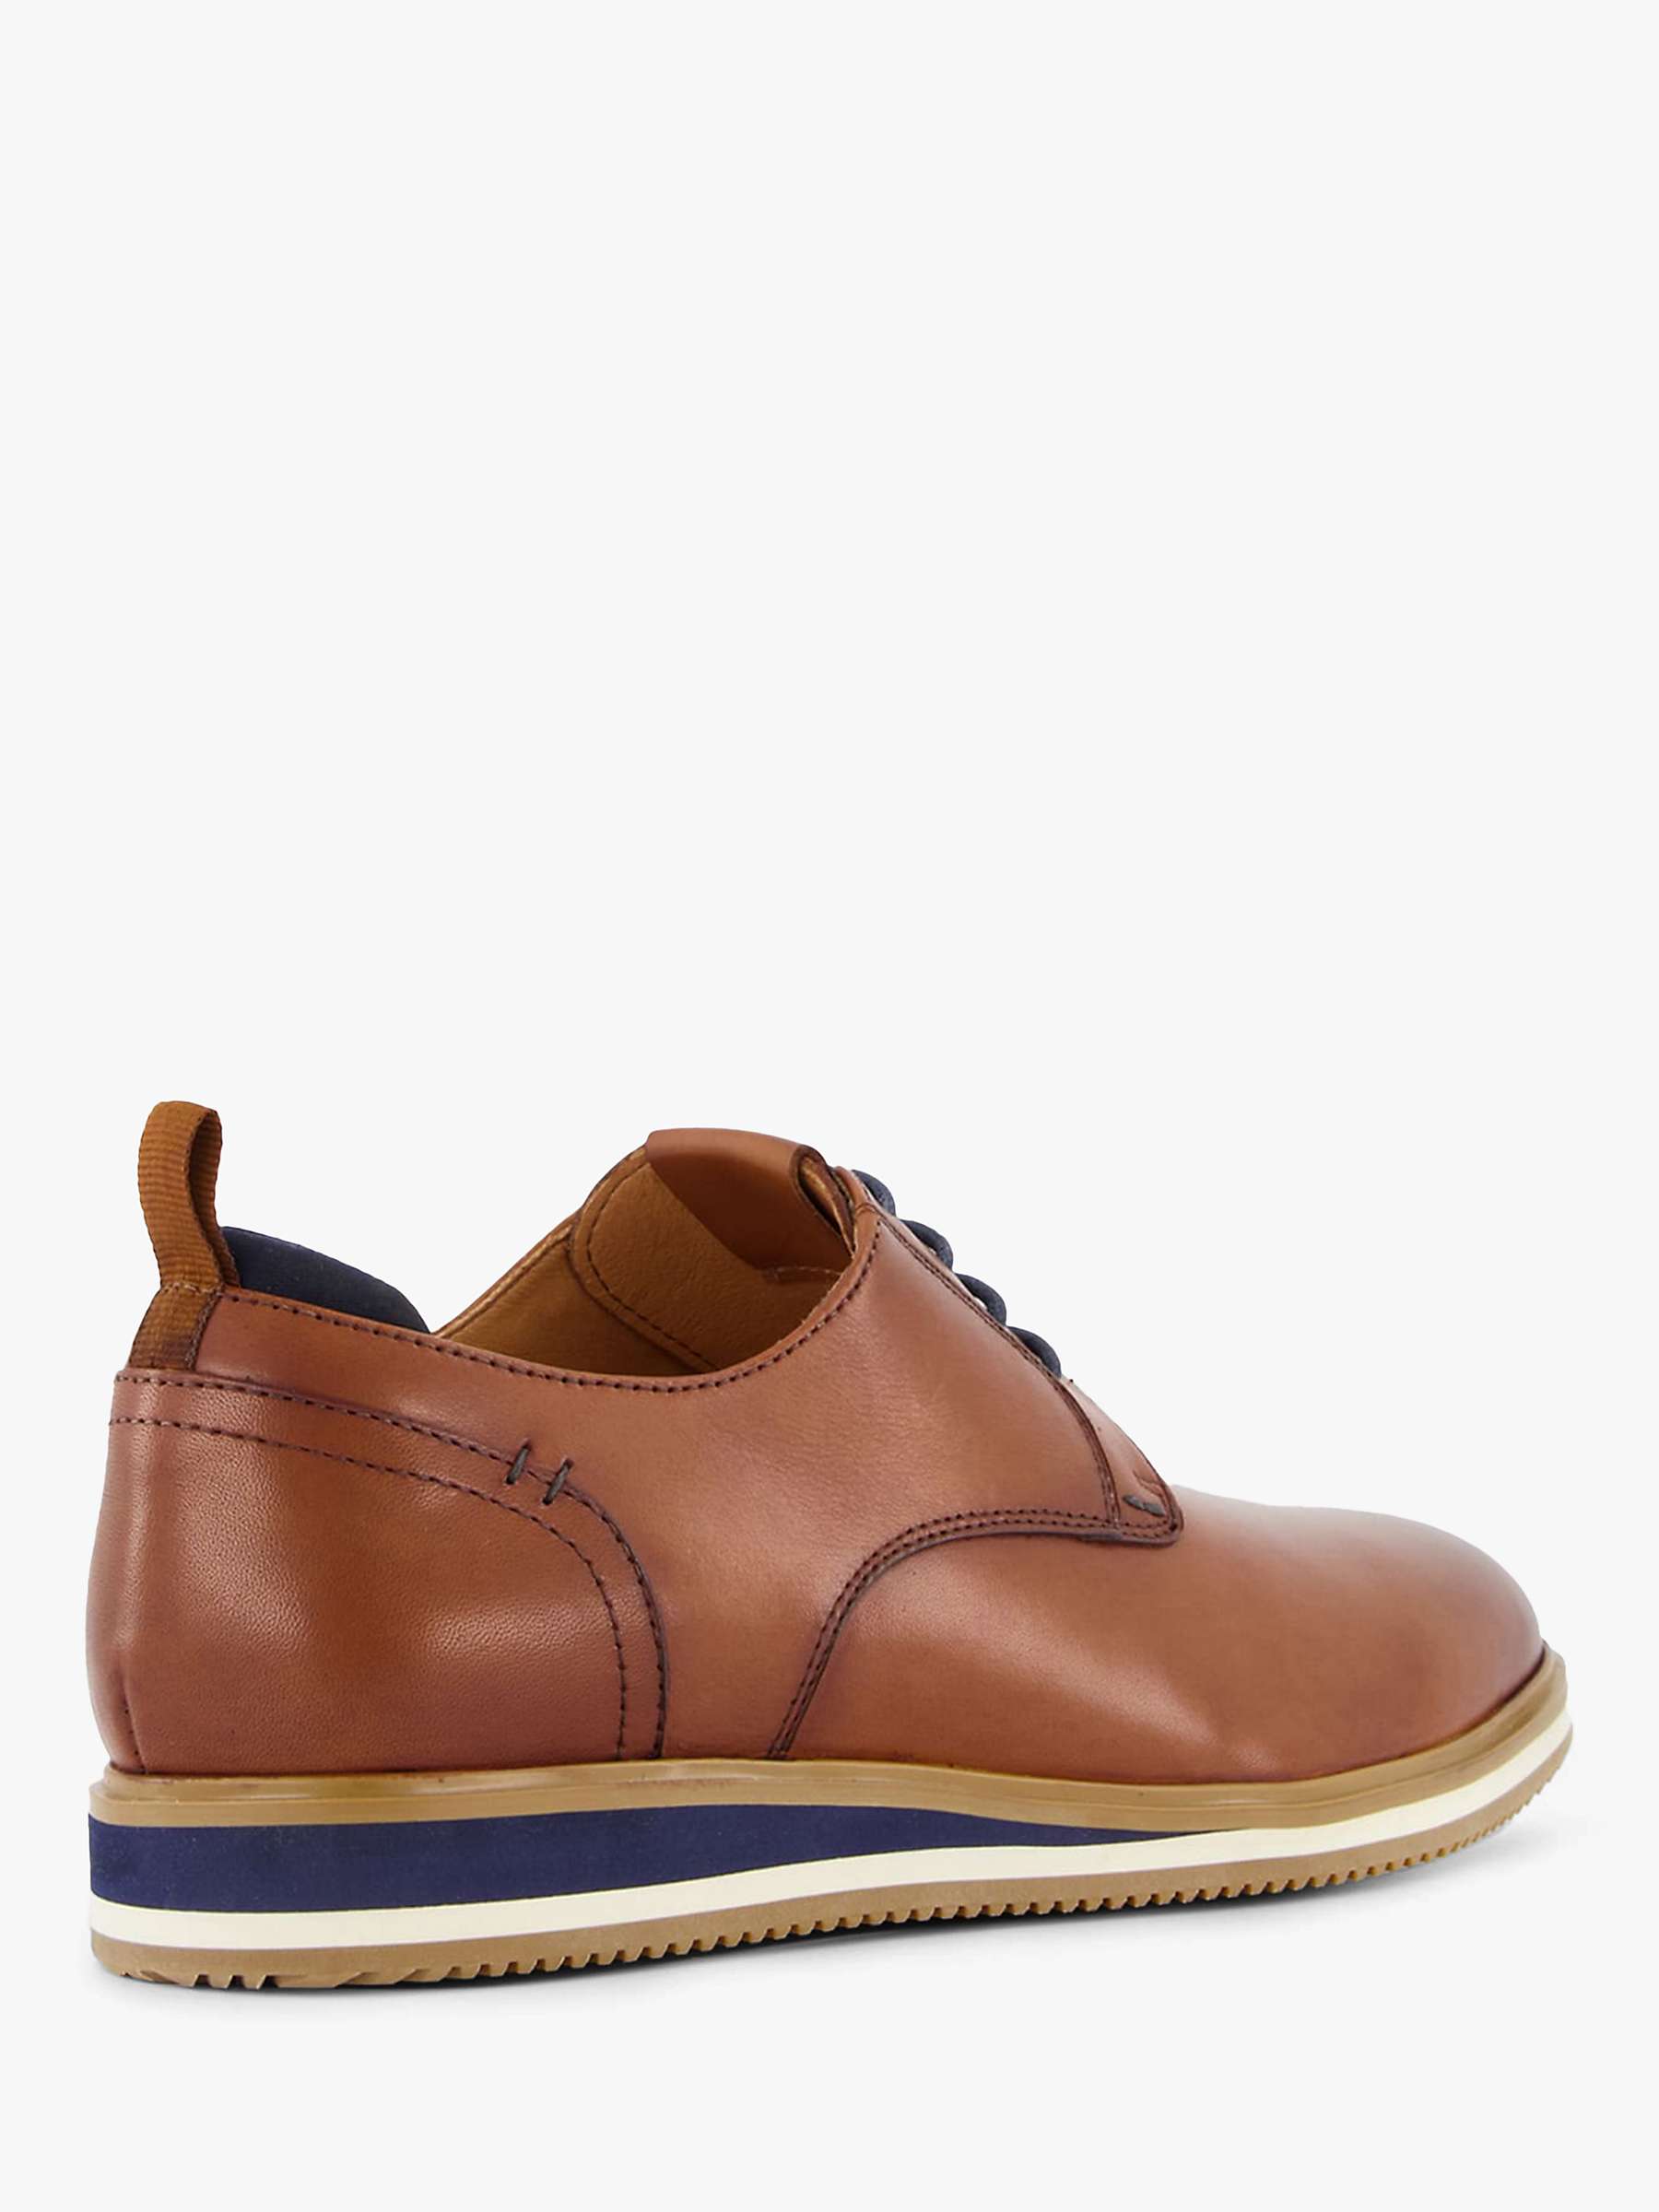 Buy Dune Bucatini Leather Wedge Sole Lace Up Shoes, Tan Online at johnlewis.com